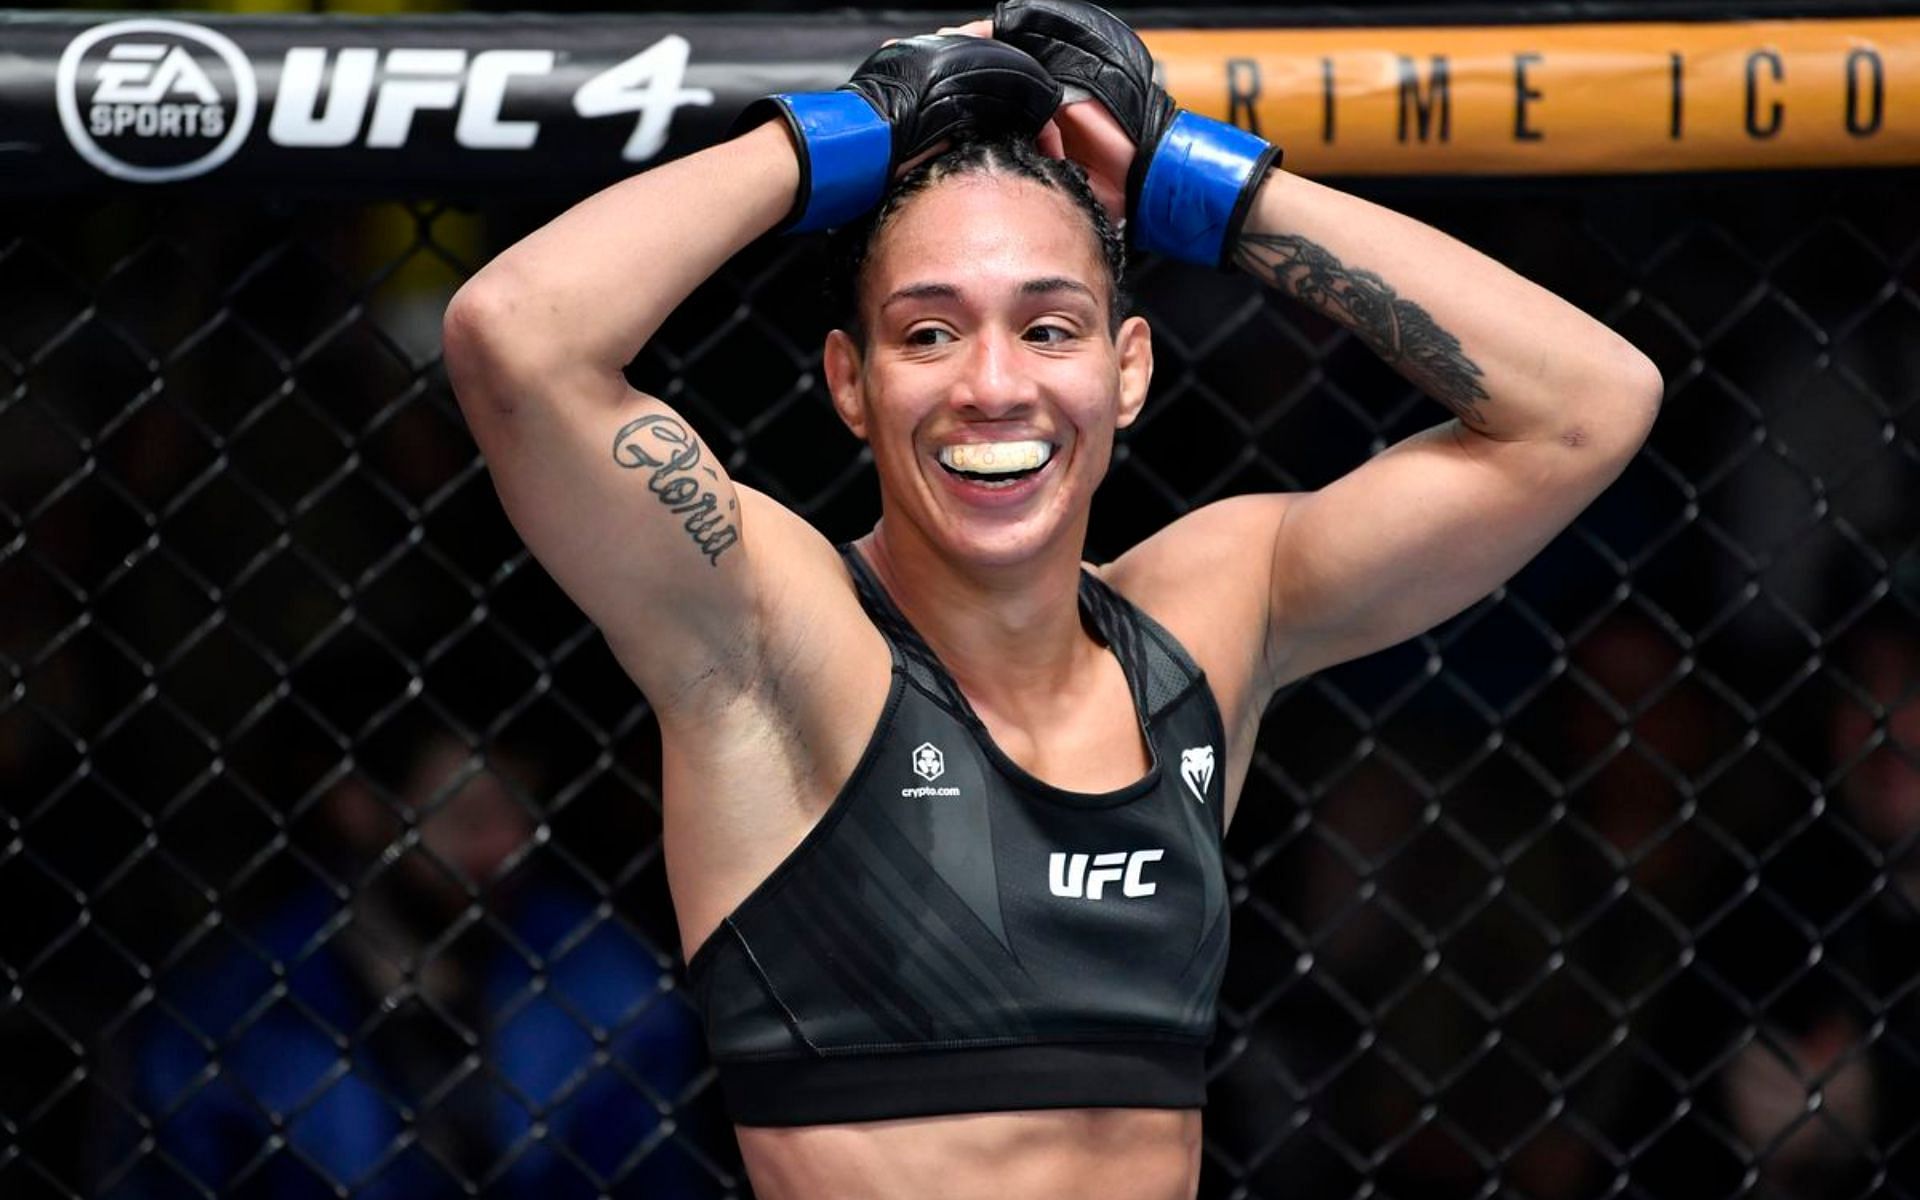 Taila Santos is set to challenge Valentina Shevchenko for the flyweight title this weekend despite only appearing on one main card